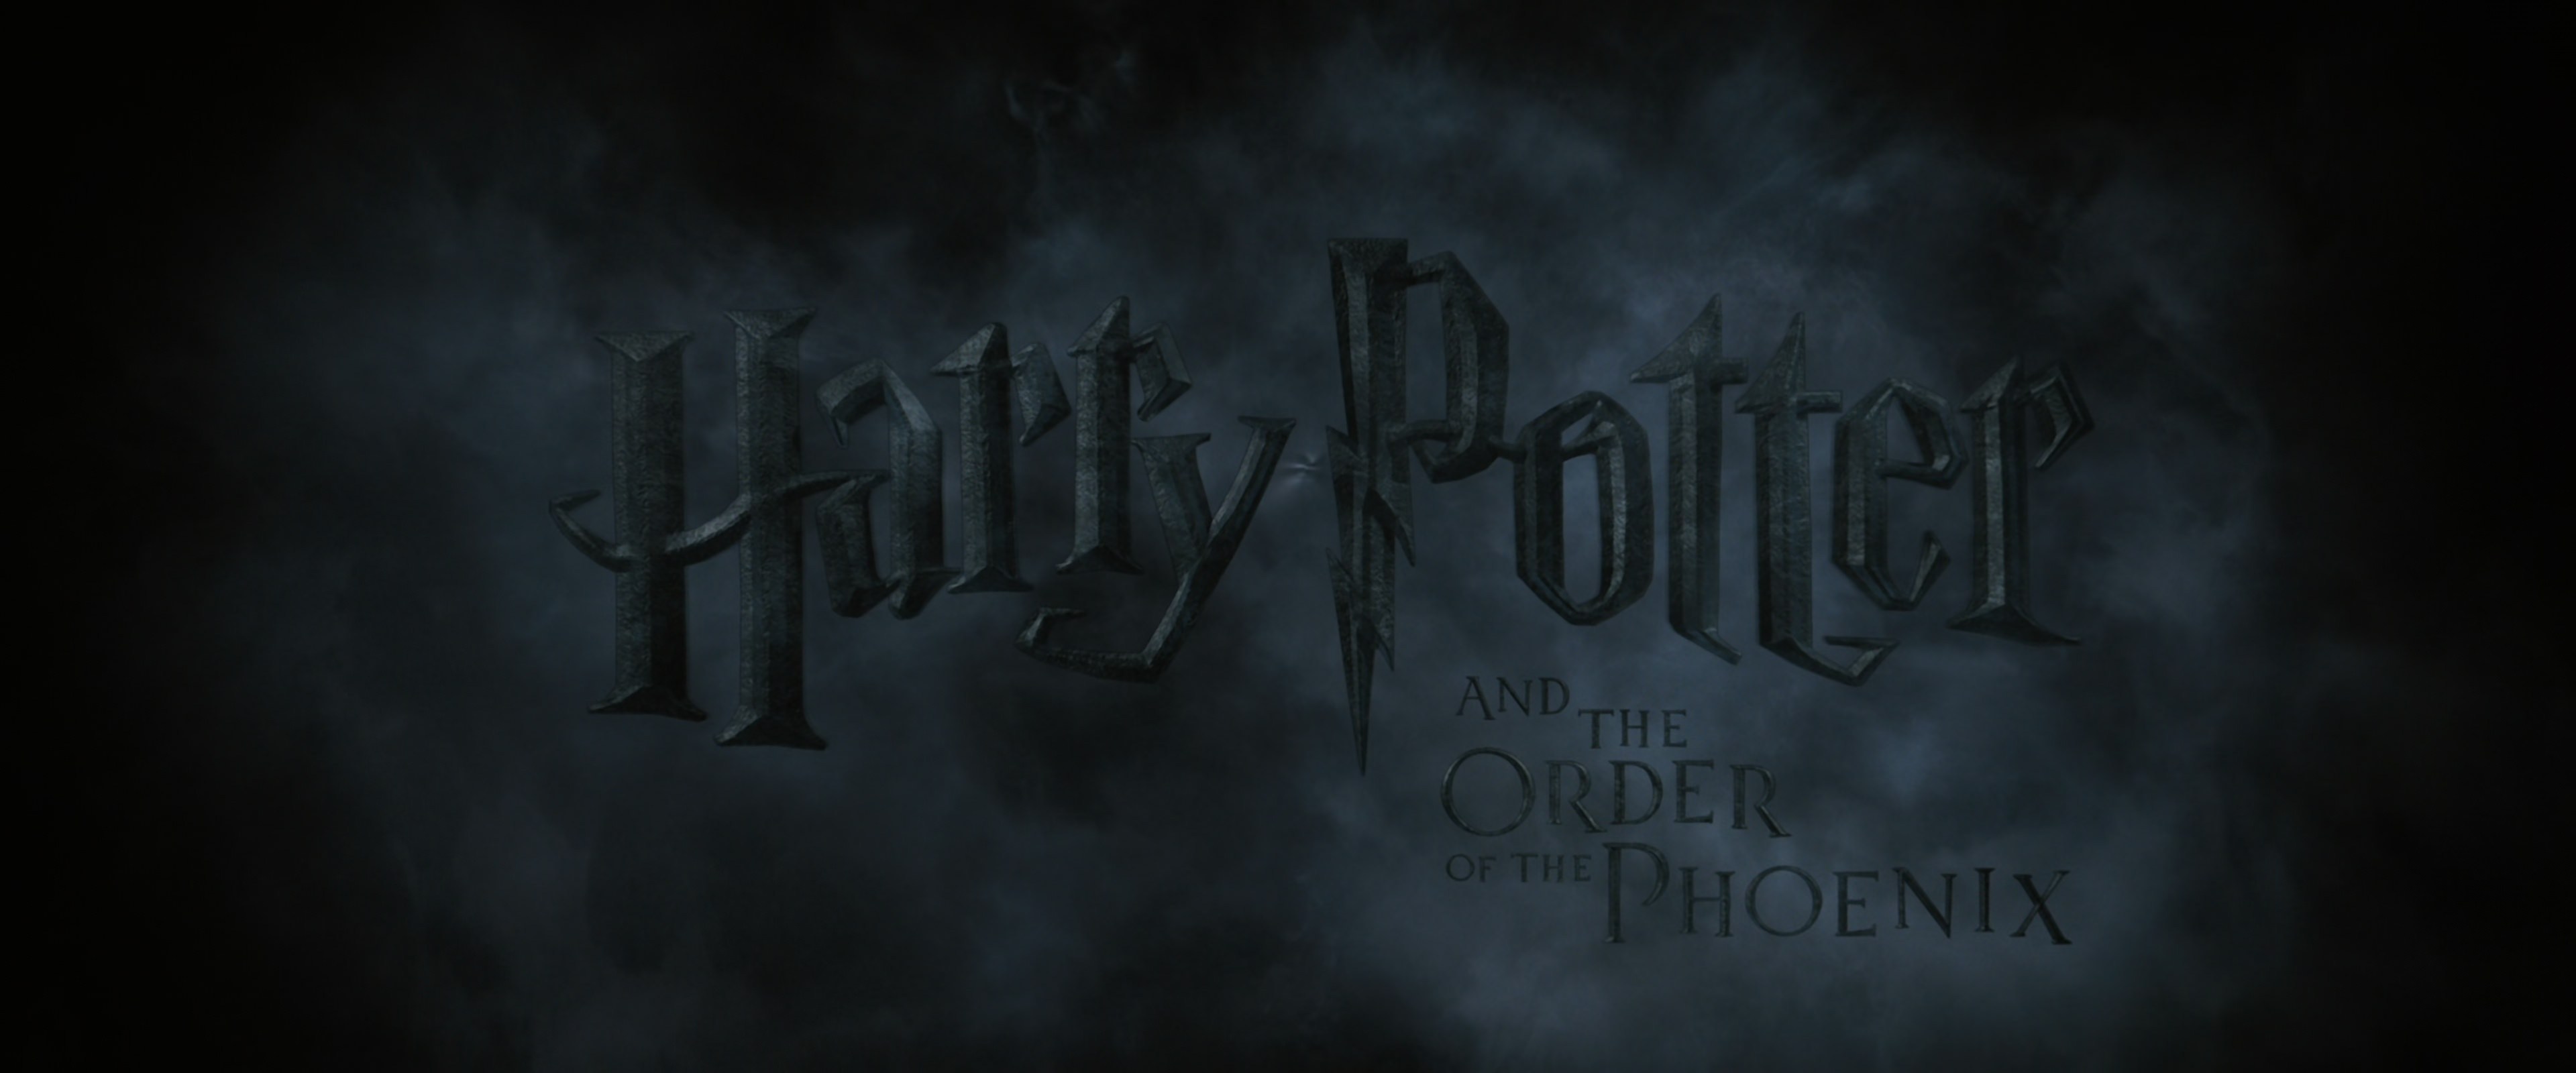 harry potter and order of phoenix 123movies